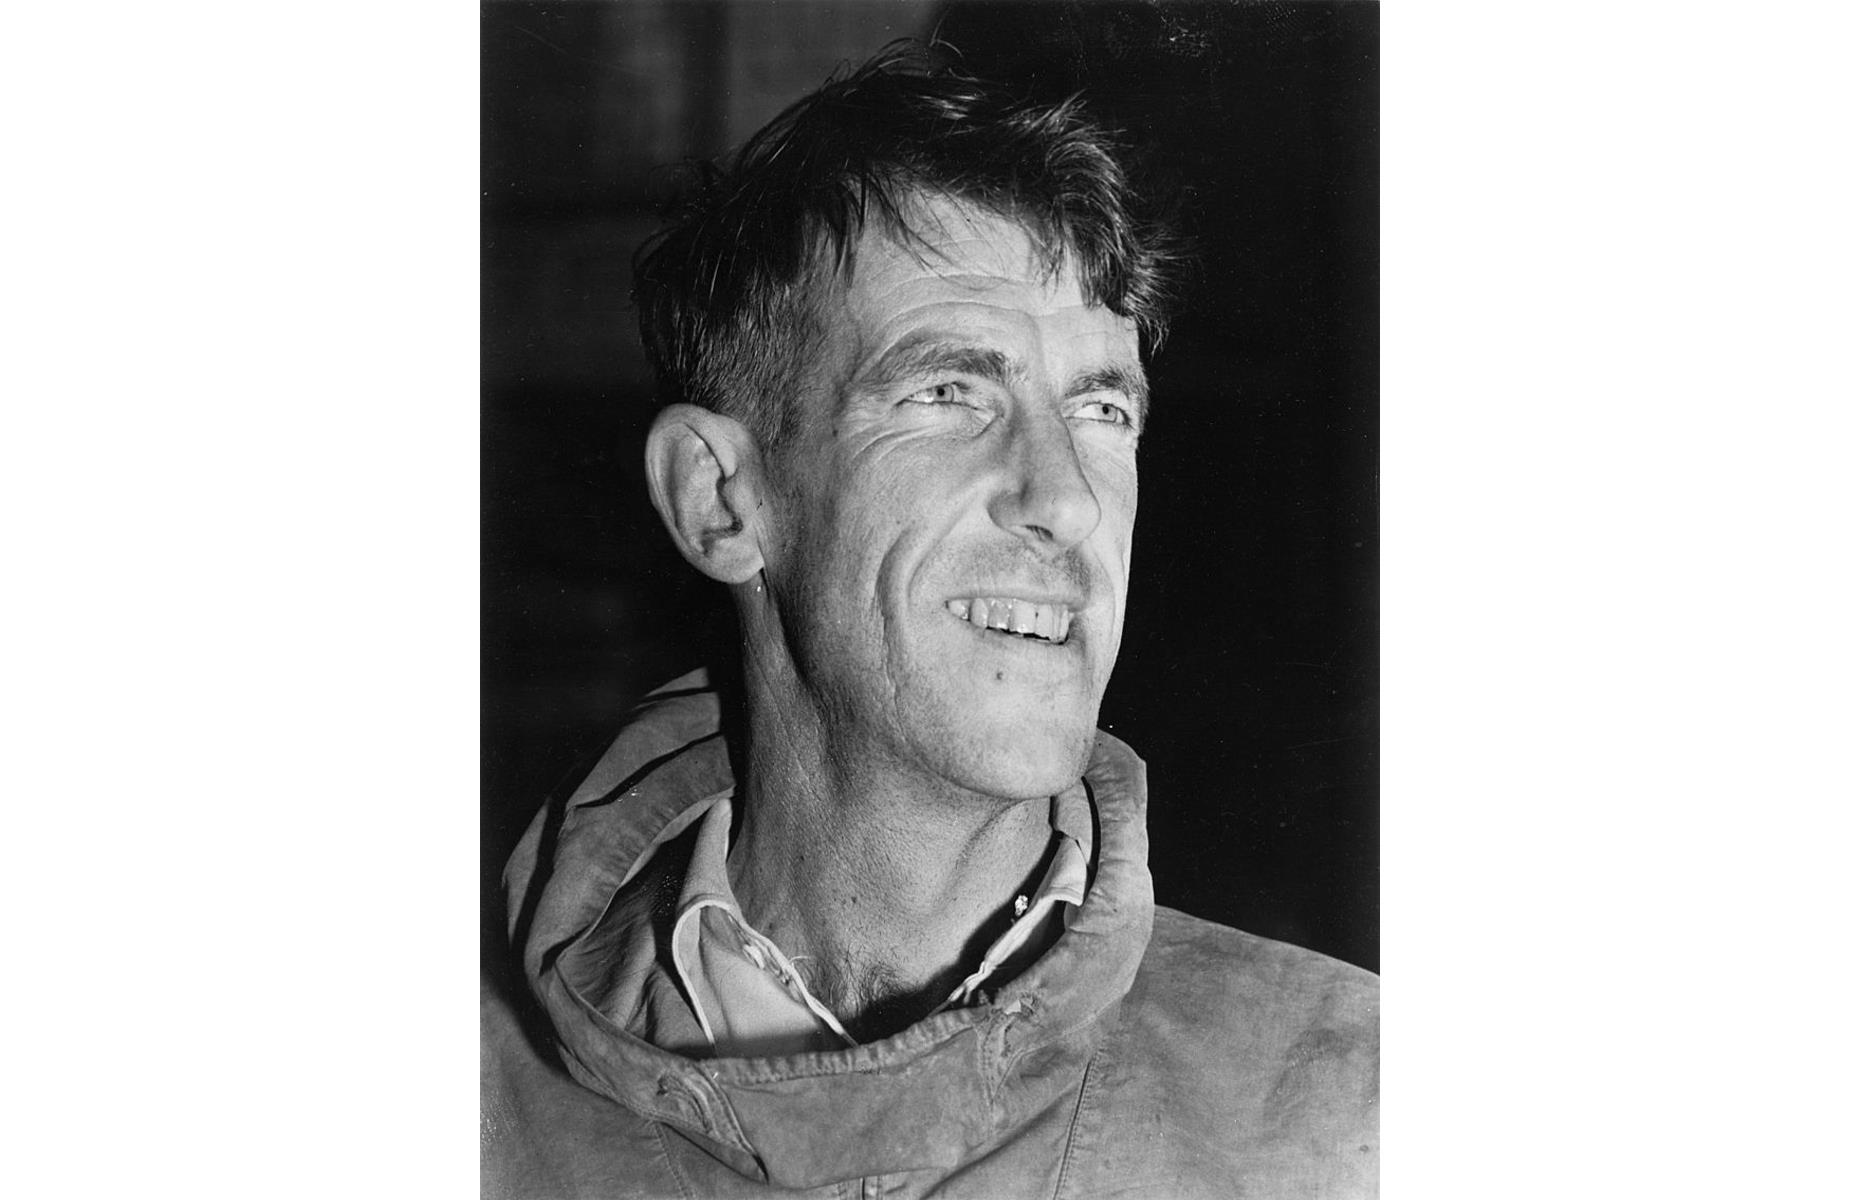 No list of intrepid explorers could be complete without mentioning Sir Edmund Hillary. Born in New Zealand, the adventurer became the first person to stand on top of Everest, along with Nepalese mountaineer Sherpa Tenzing Norgay on 29 May 1953. Before climbing Everest became a tourist activity, Sir Edmund and Norgay had to battle exhaustion, low oxygen levels, bitterly cold temperatures and strong winds to complete the dangerous challenge.